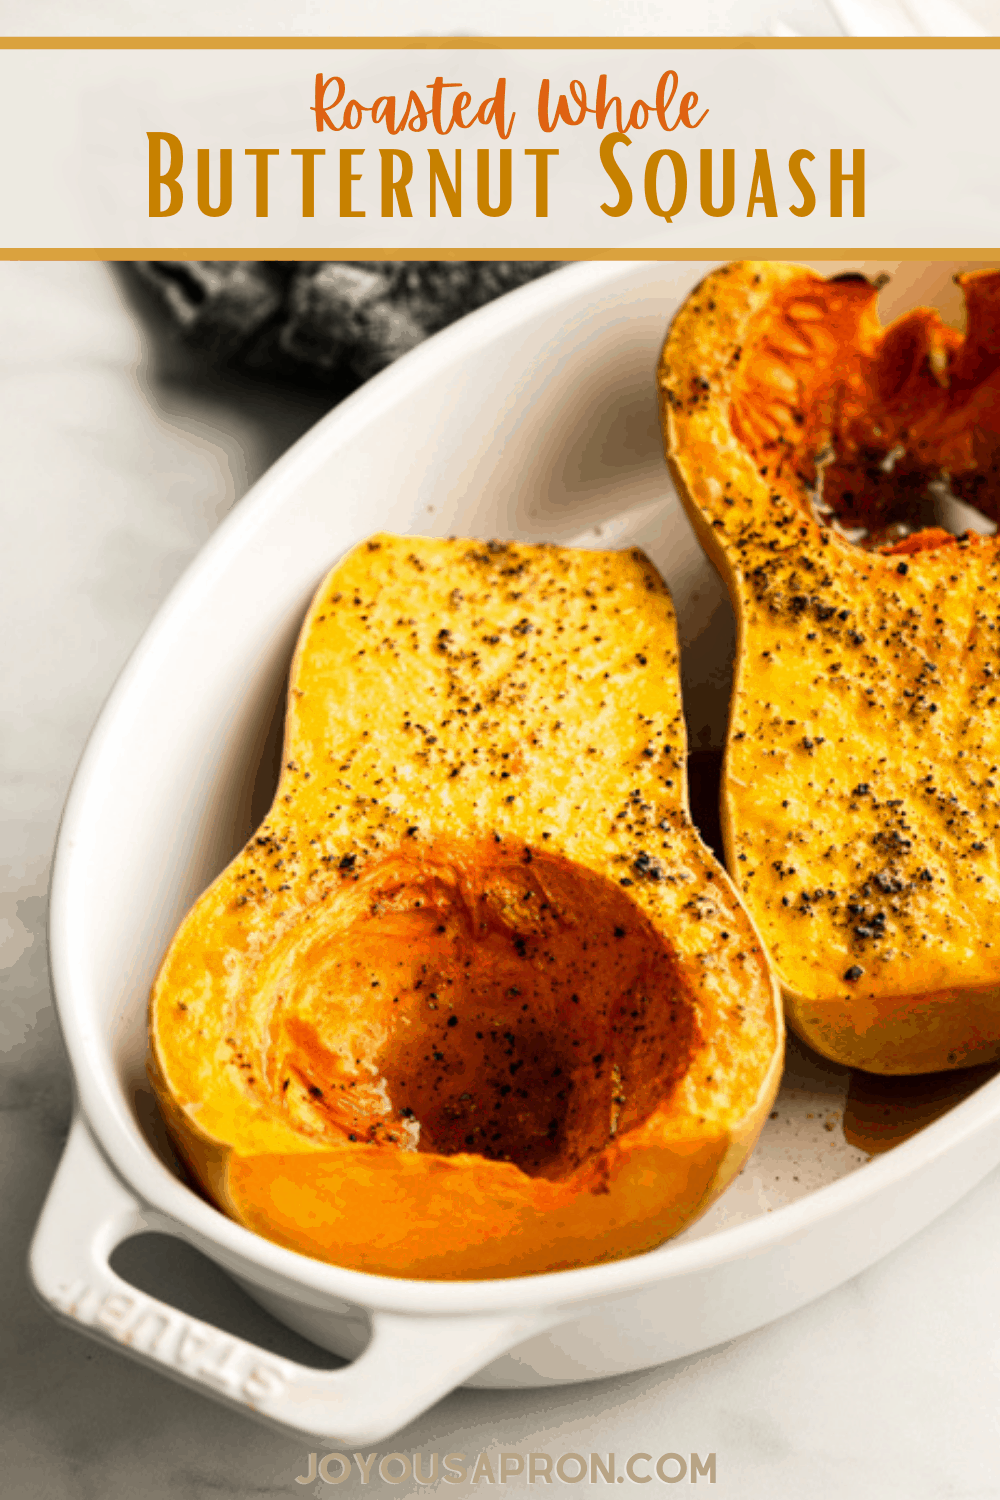 Roasted Butternut Squash - Learn how to roast whole butternut squash. Lightly seasoned butternut squash oven baked is an easy, healthy and delicious Fall vegetable dish. via @joyousapron